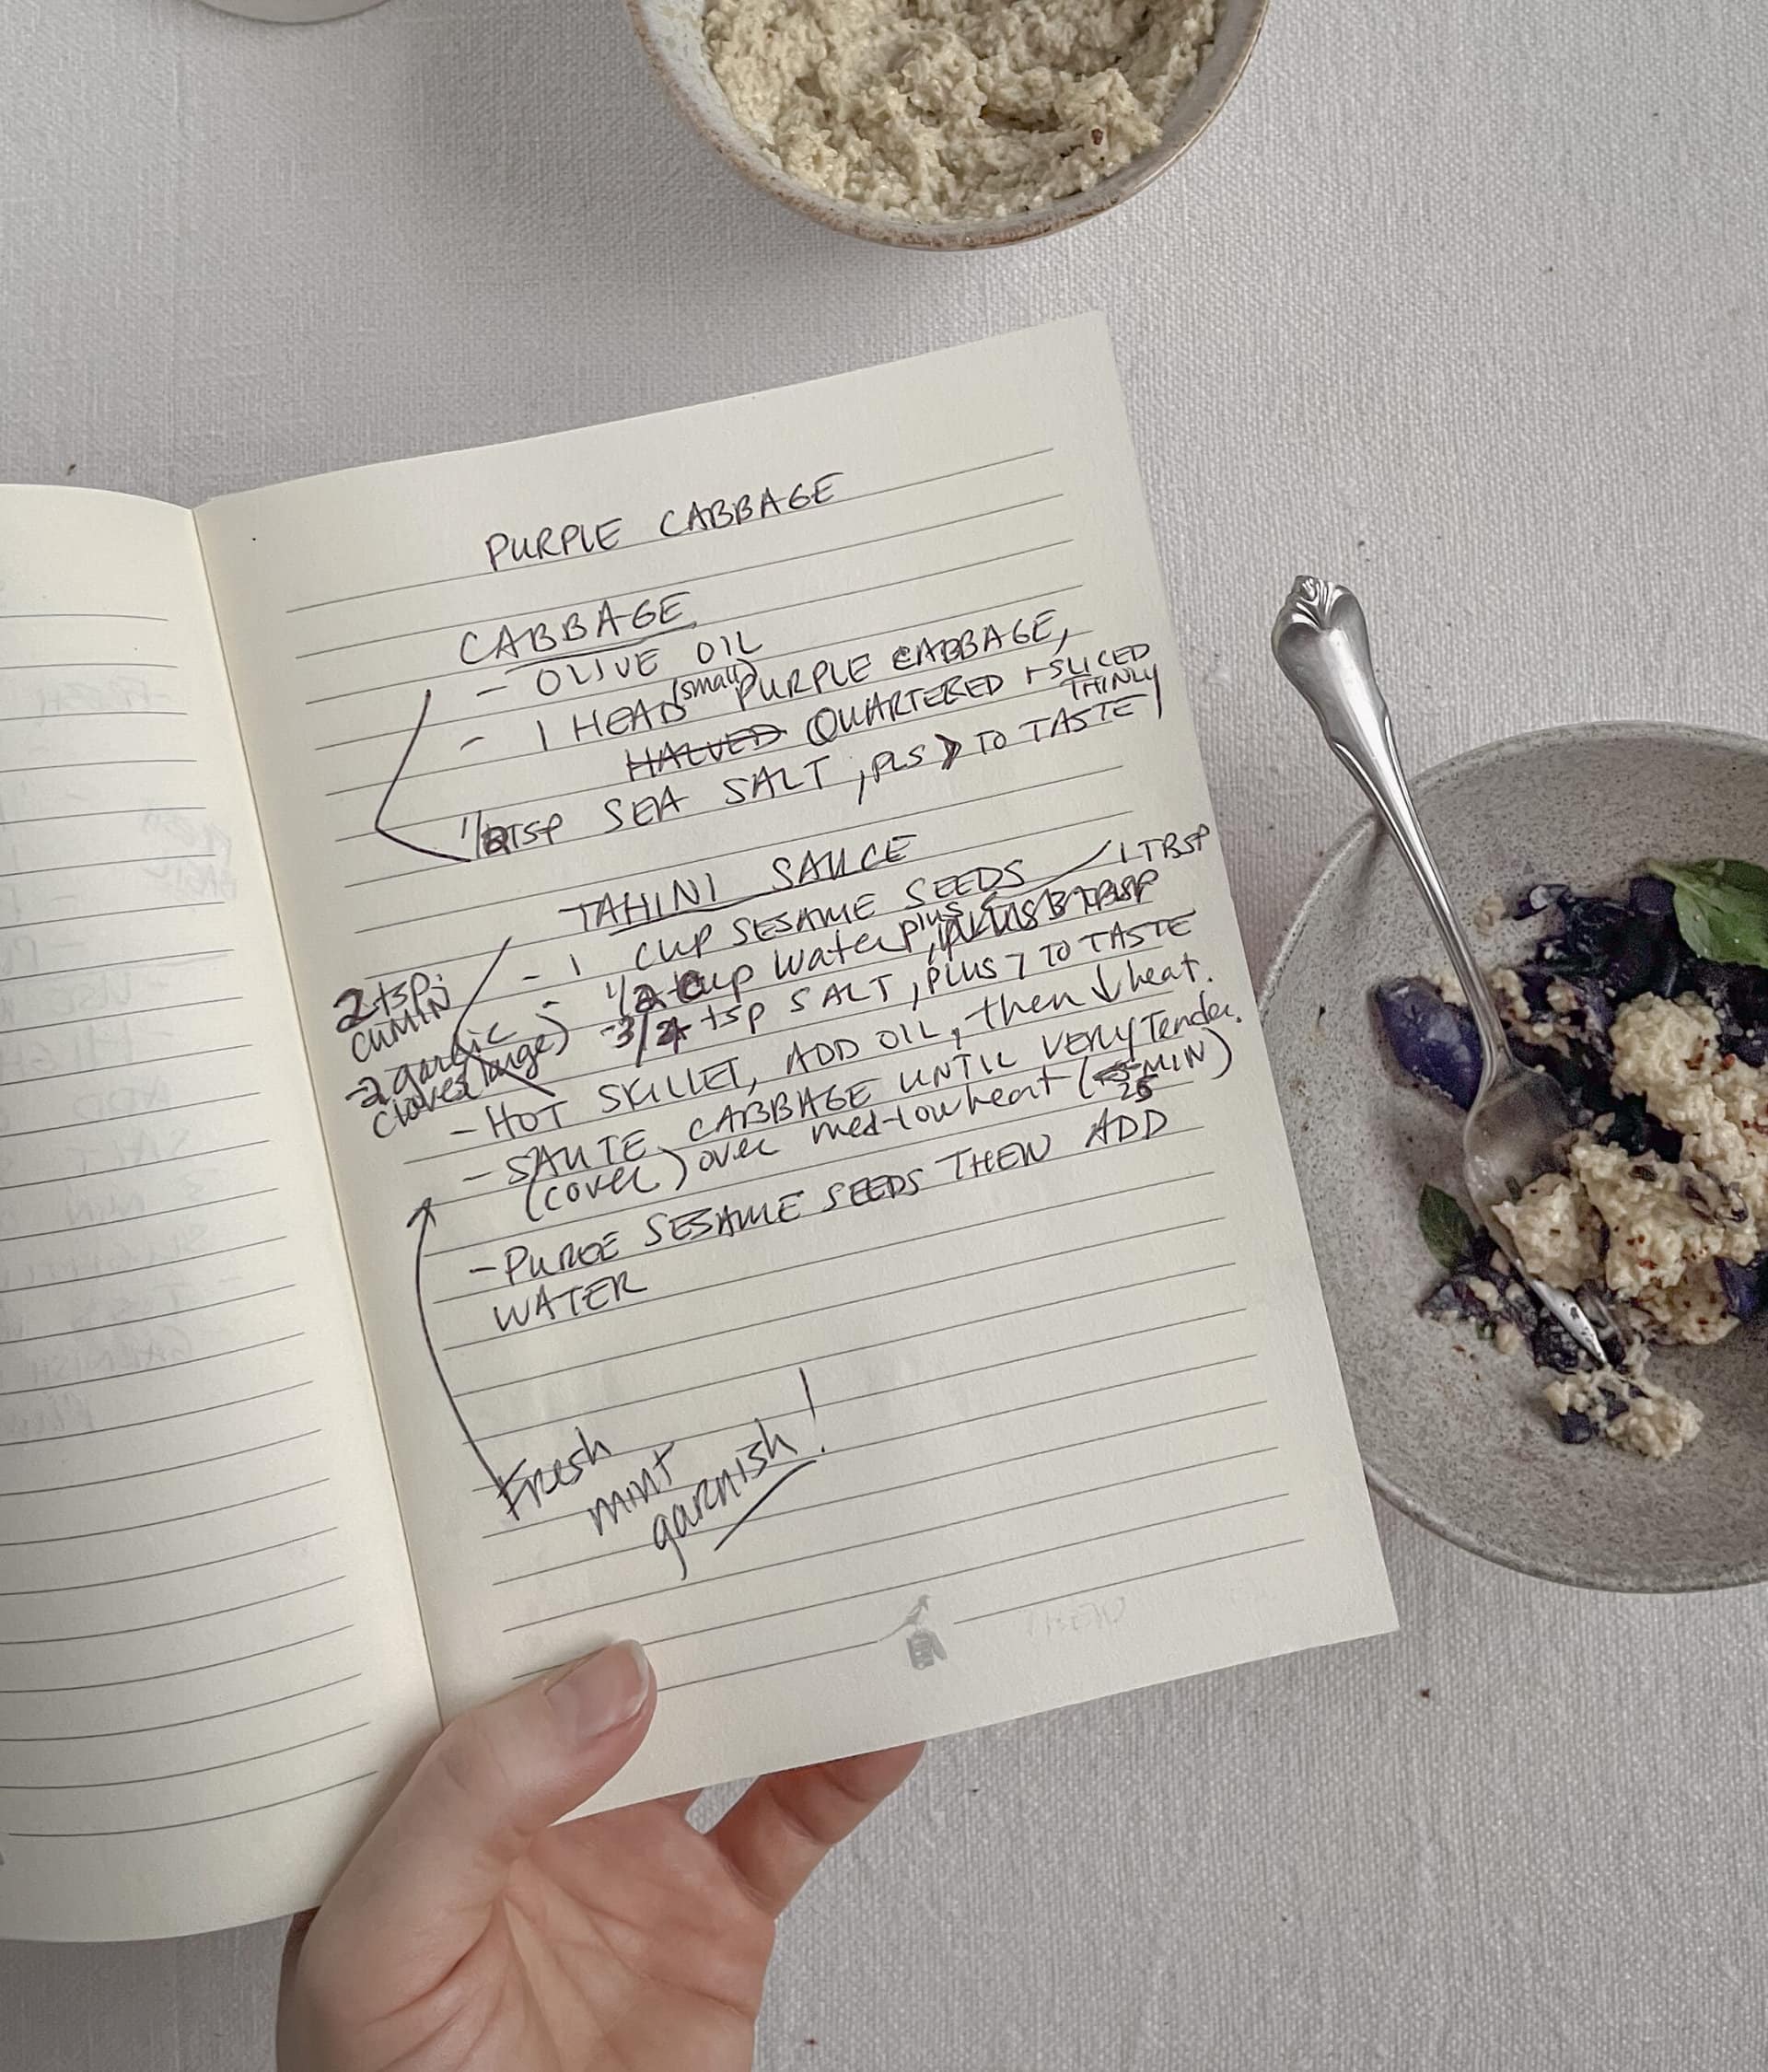 recipe card written out in pen for the sauteed cabbage